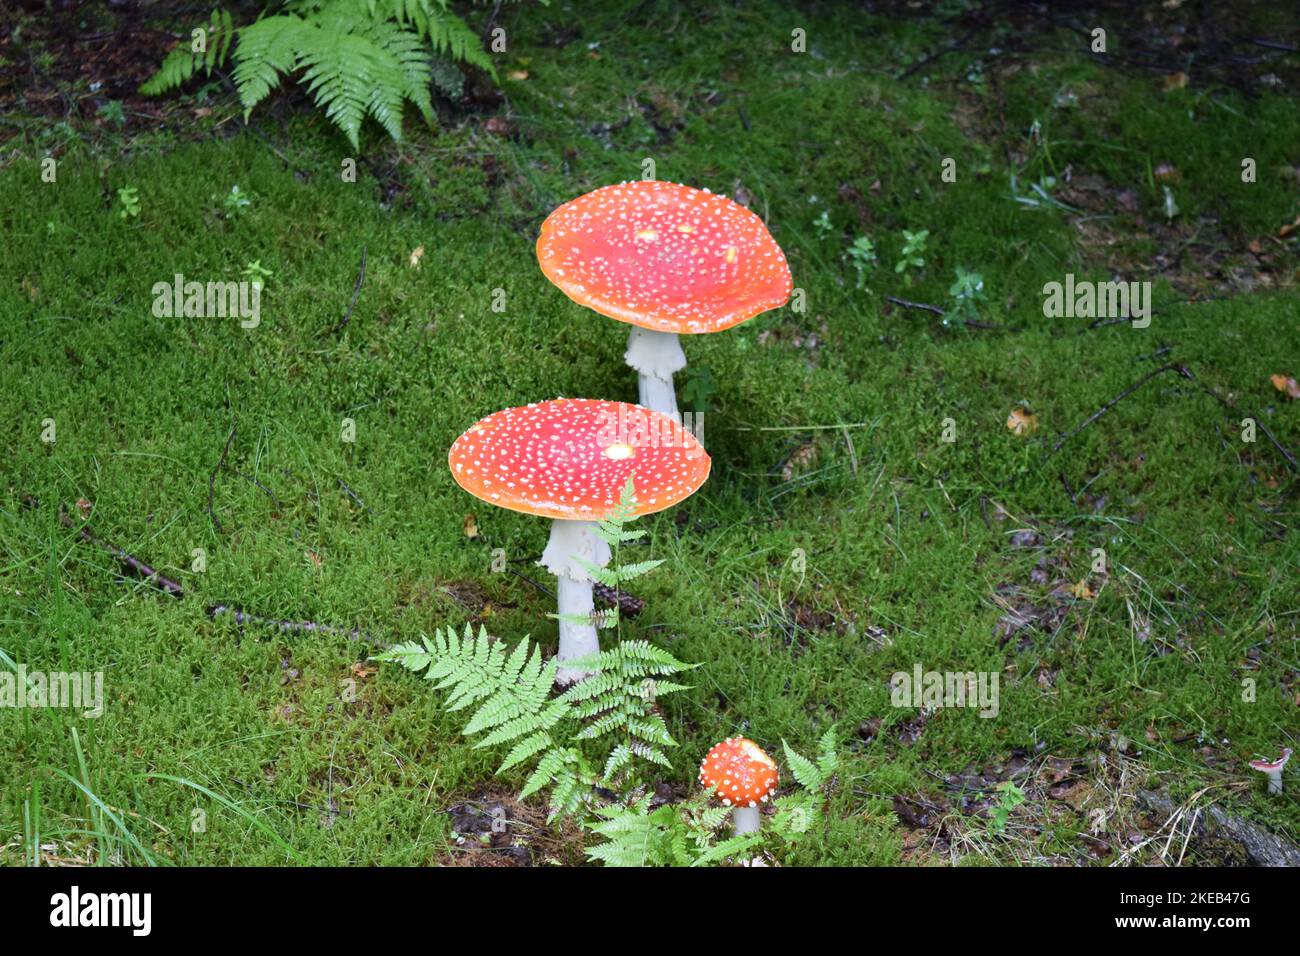 Red and white mushroom, red-capped mushrooms with white warty spots. Stock Photo